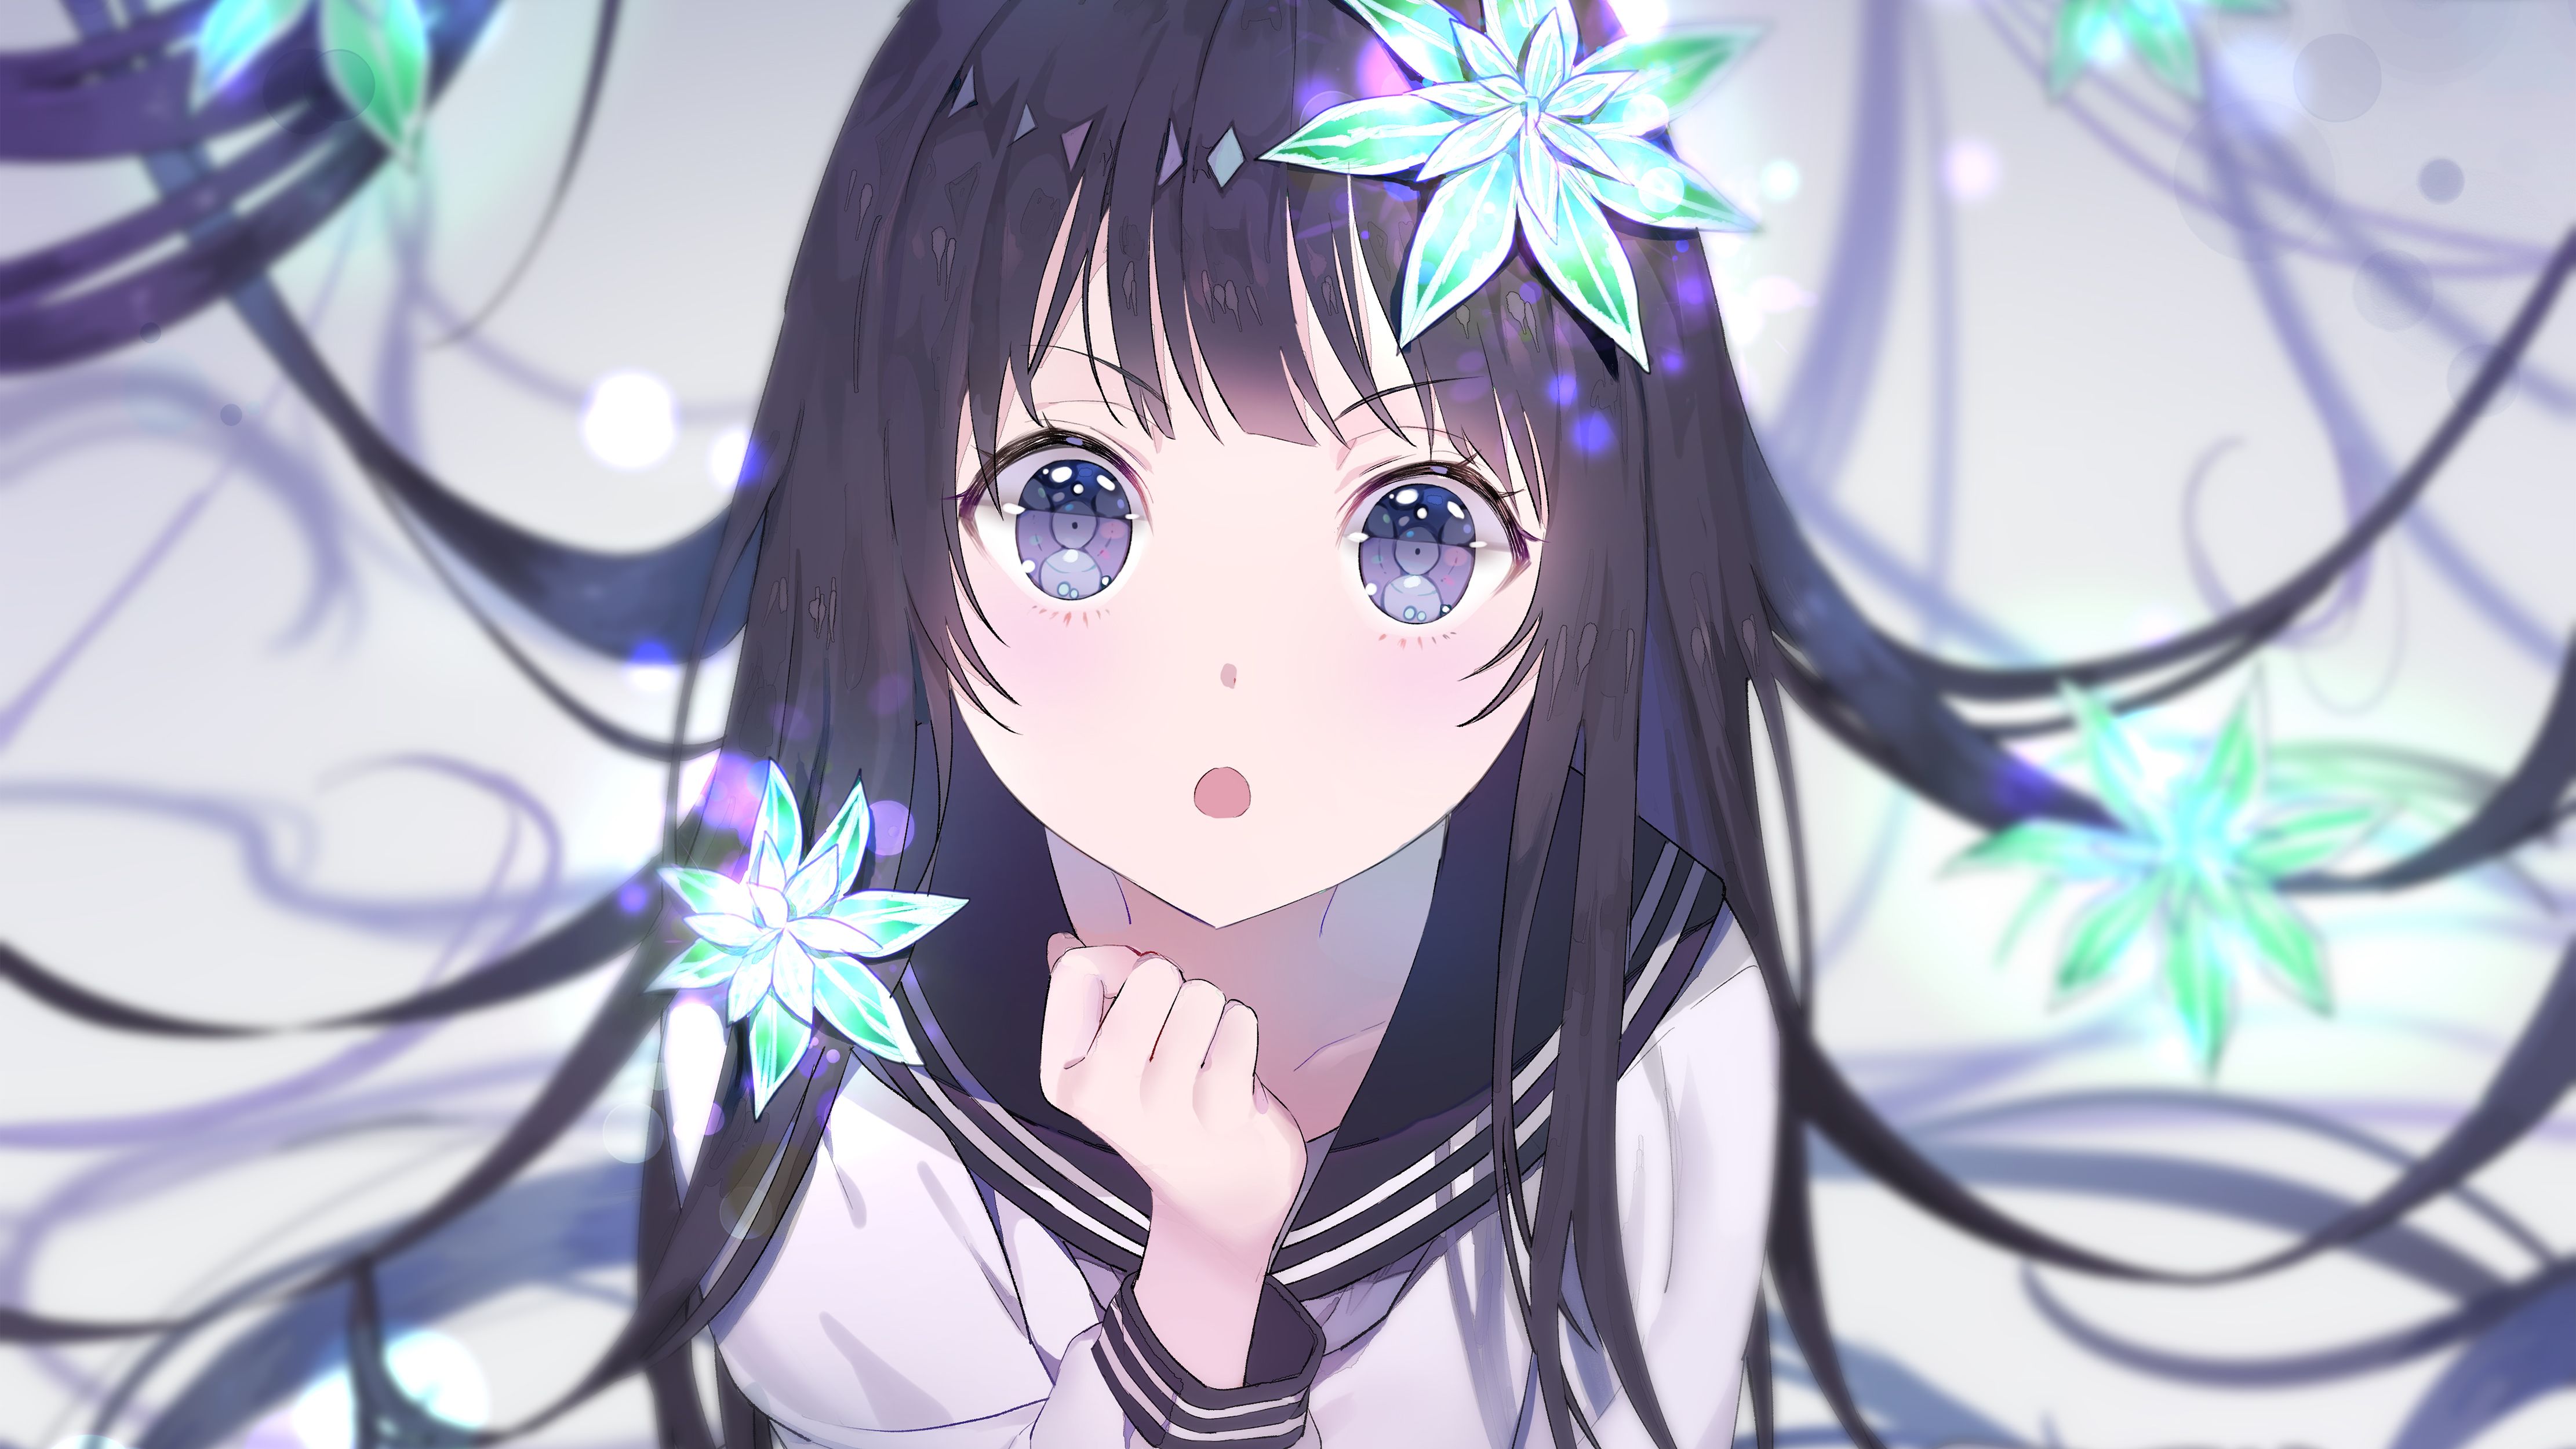 Cute Anime Wallpapers HD Free download 